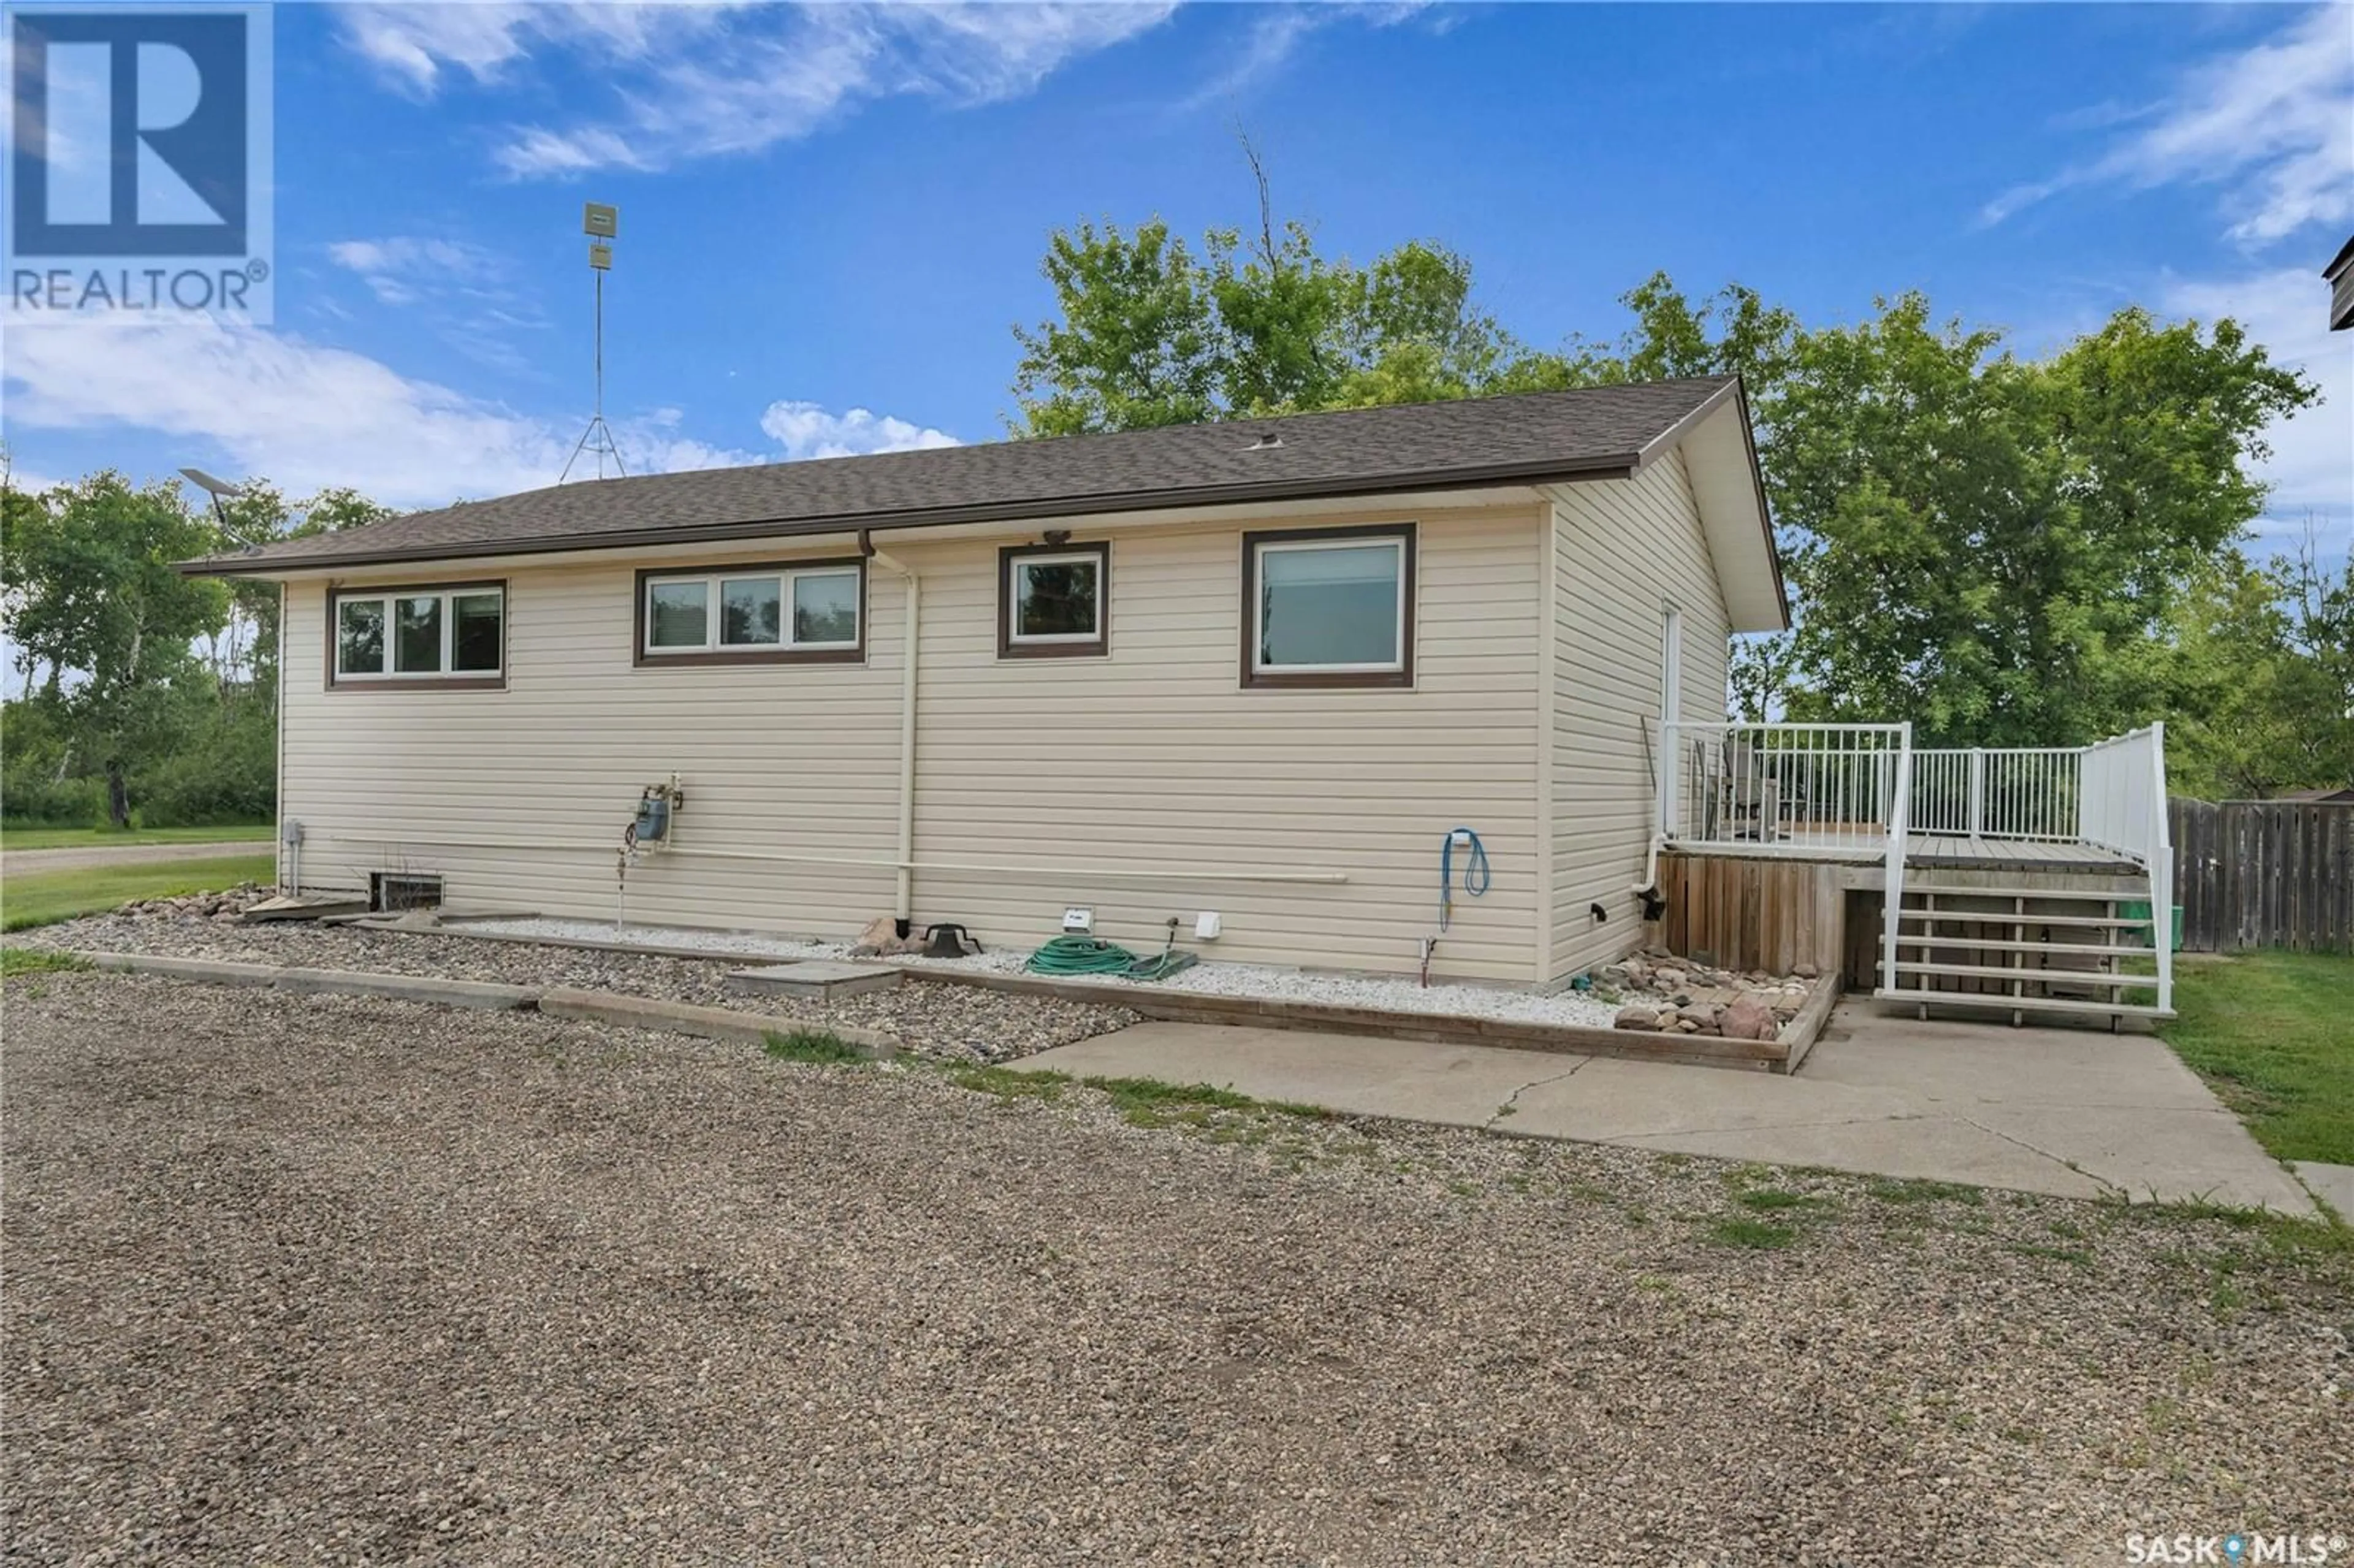 A pic from exterior of the house or condo for Rural  Address, South Qu'Appelle Rm No. 157 Saskatchewan S0G1L0